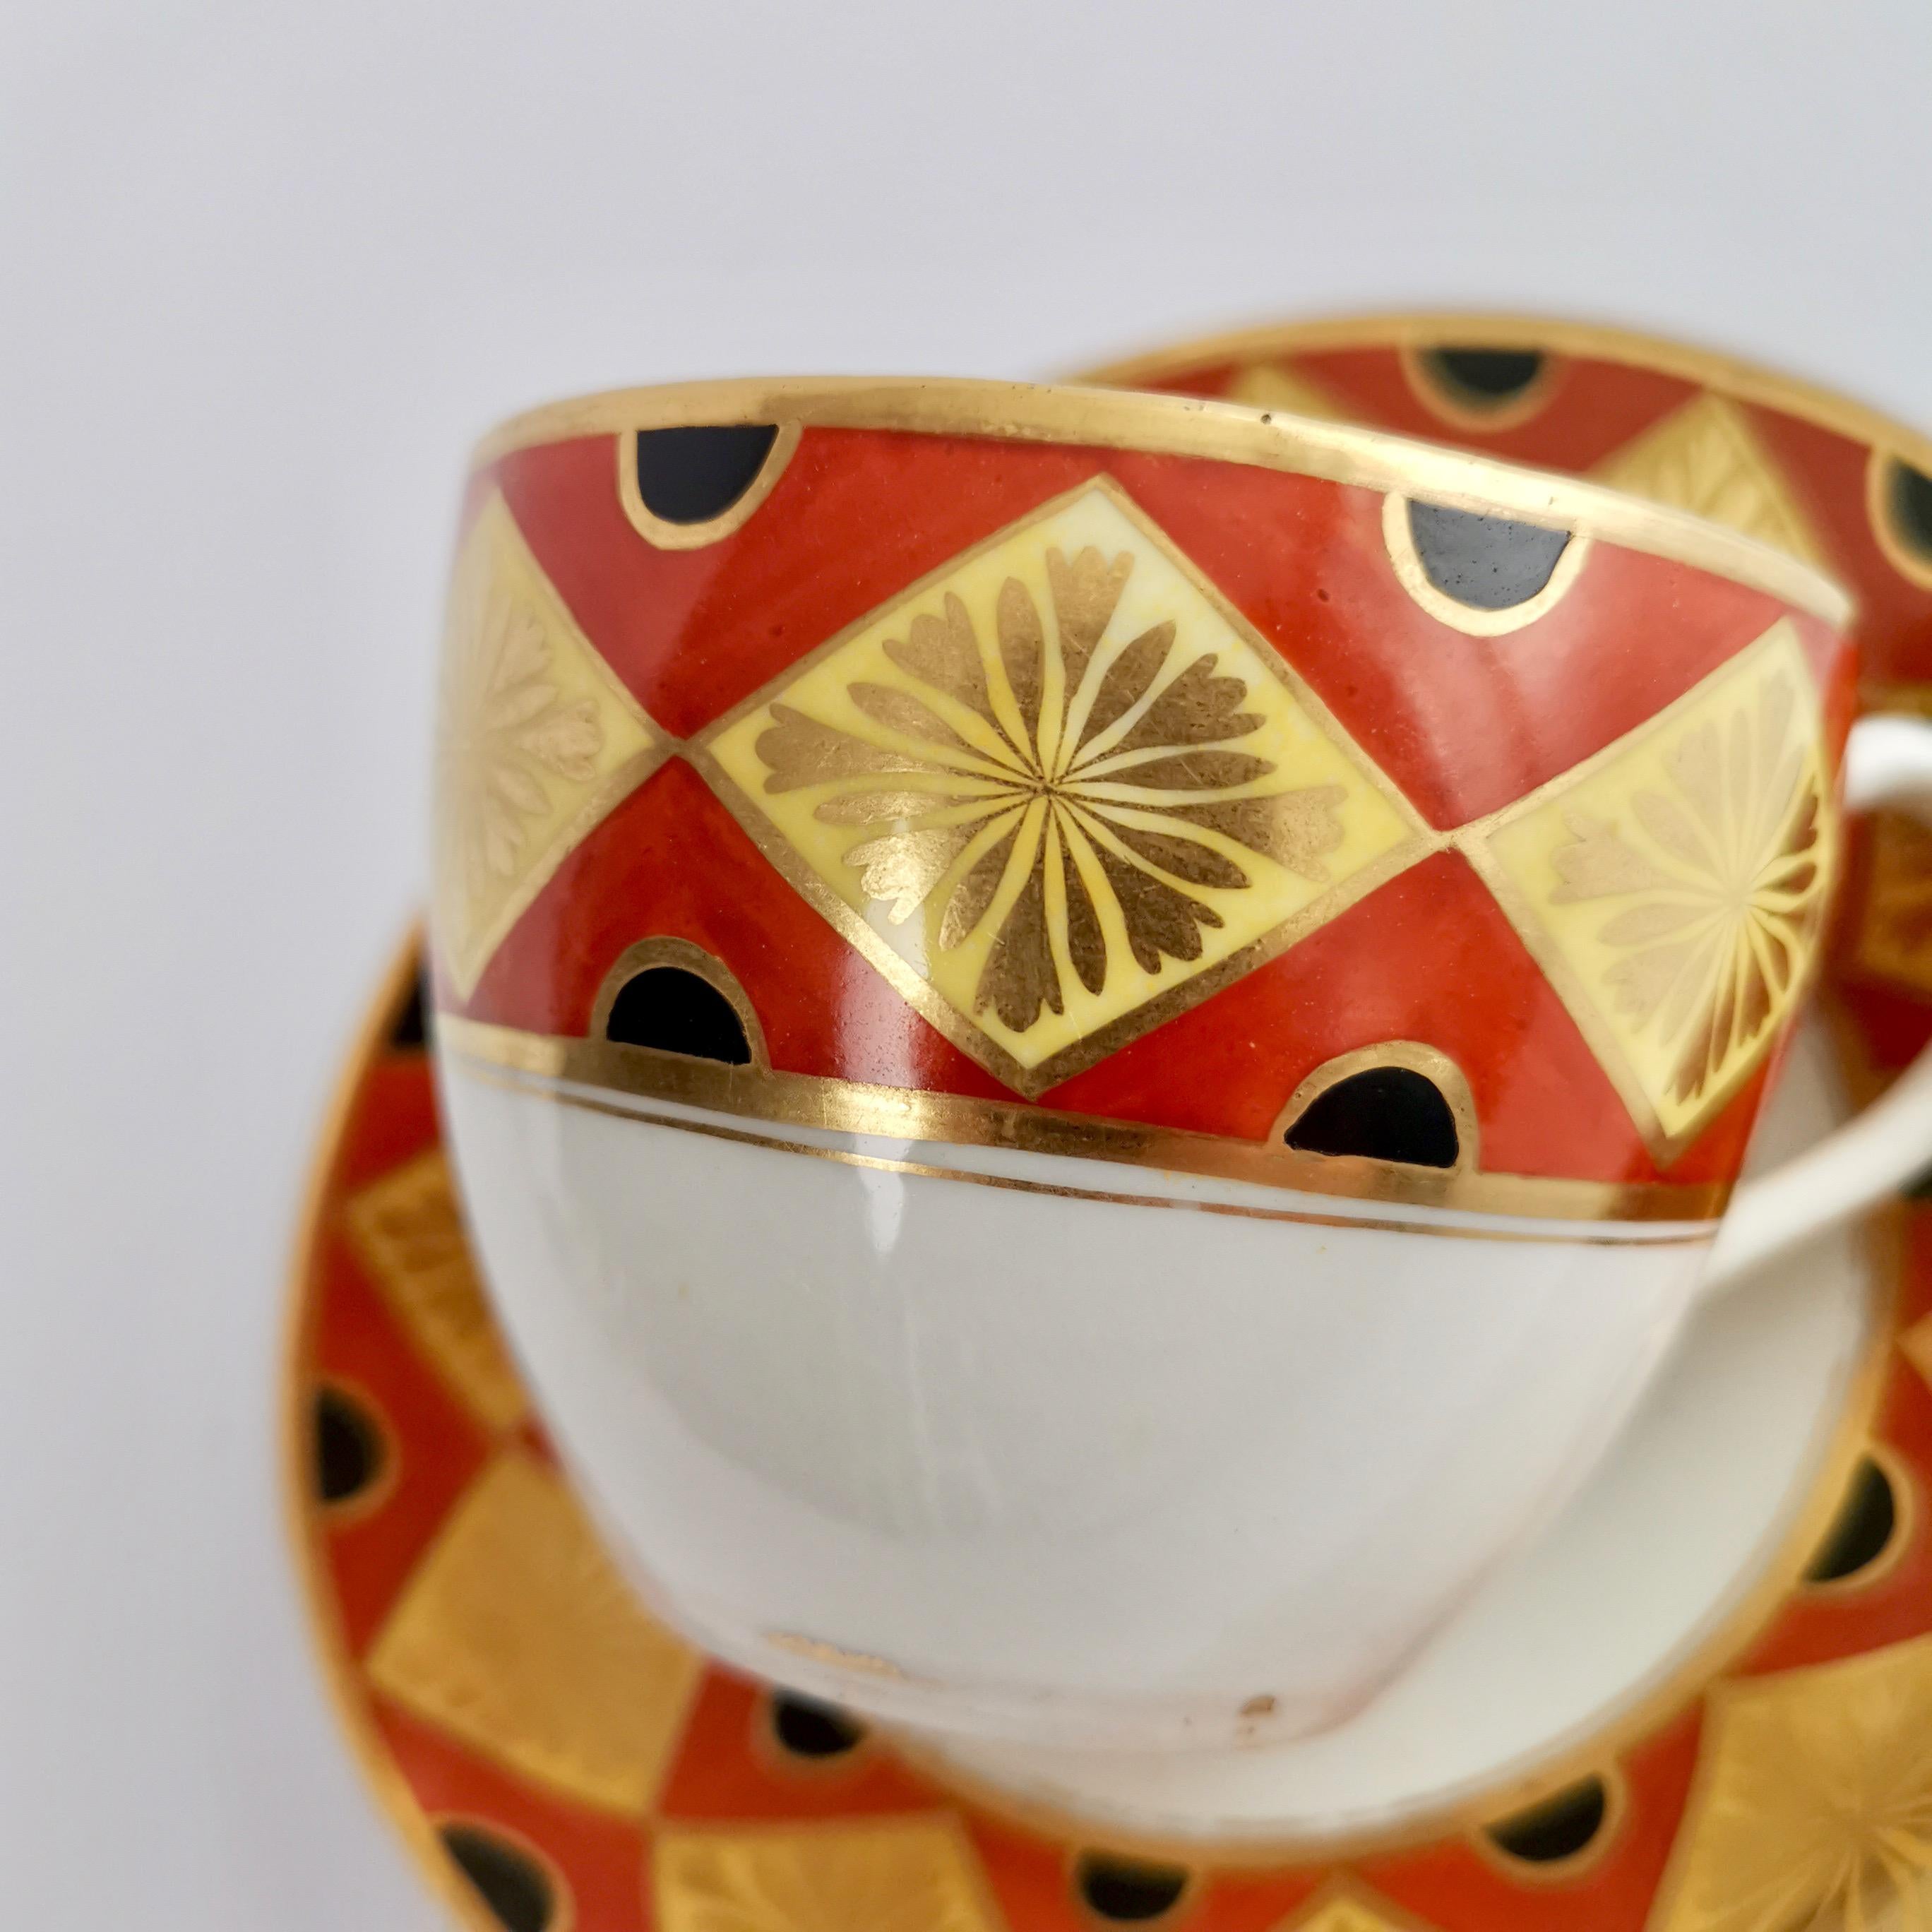 Hand-Painted Coalport Porcelain Teacup, Neo-classical Design Red, Yellow and Black, ca 1805